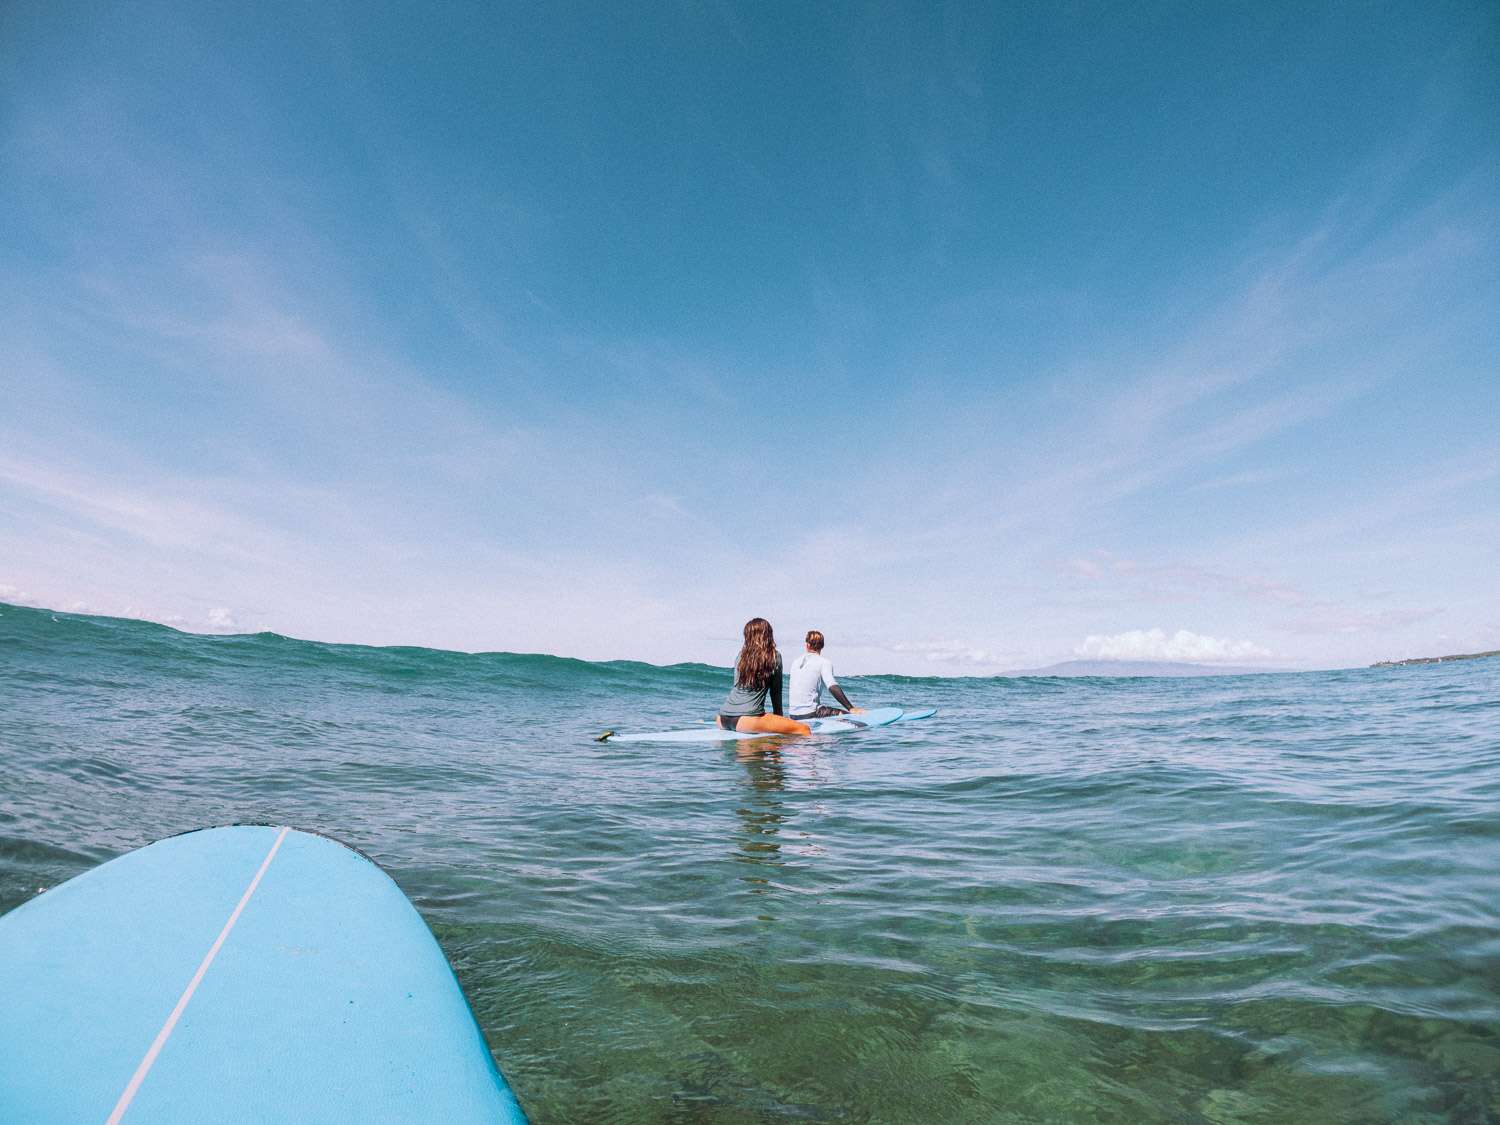 Rachel Off Duty: Best Things to Do on Maui – Take a Surfing Lesson